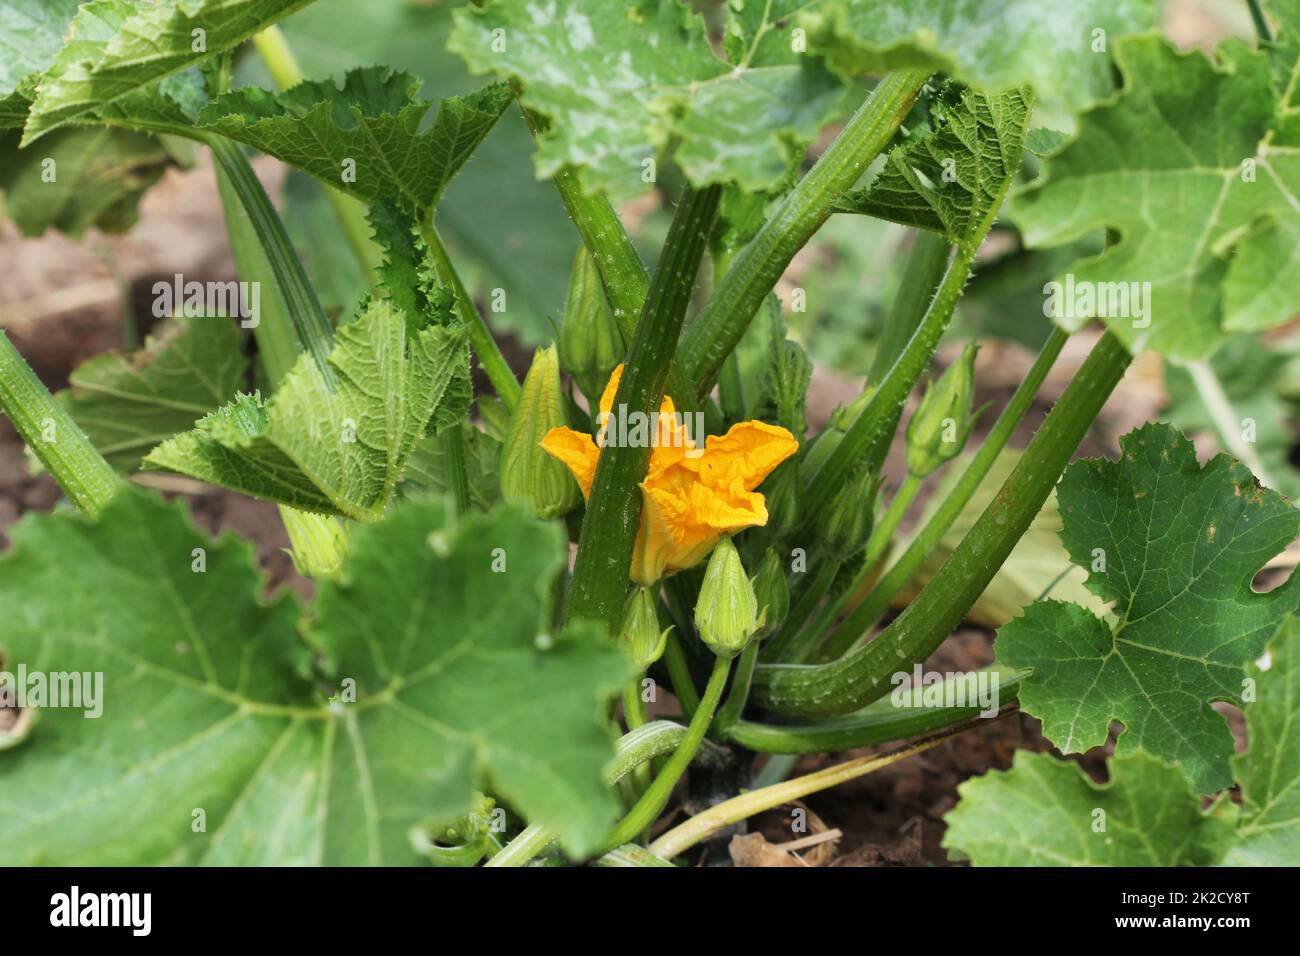 Zucchini plants in blossom on the garden bed Stock Photo